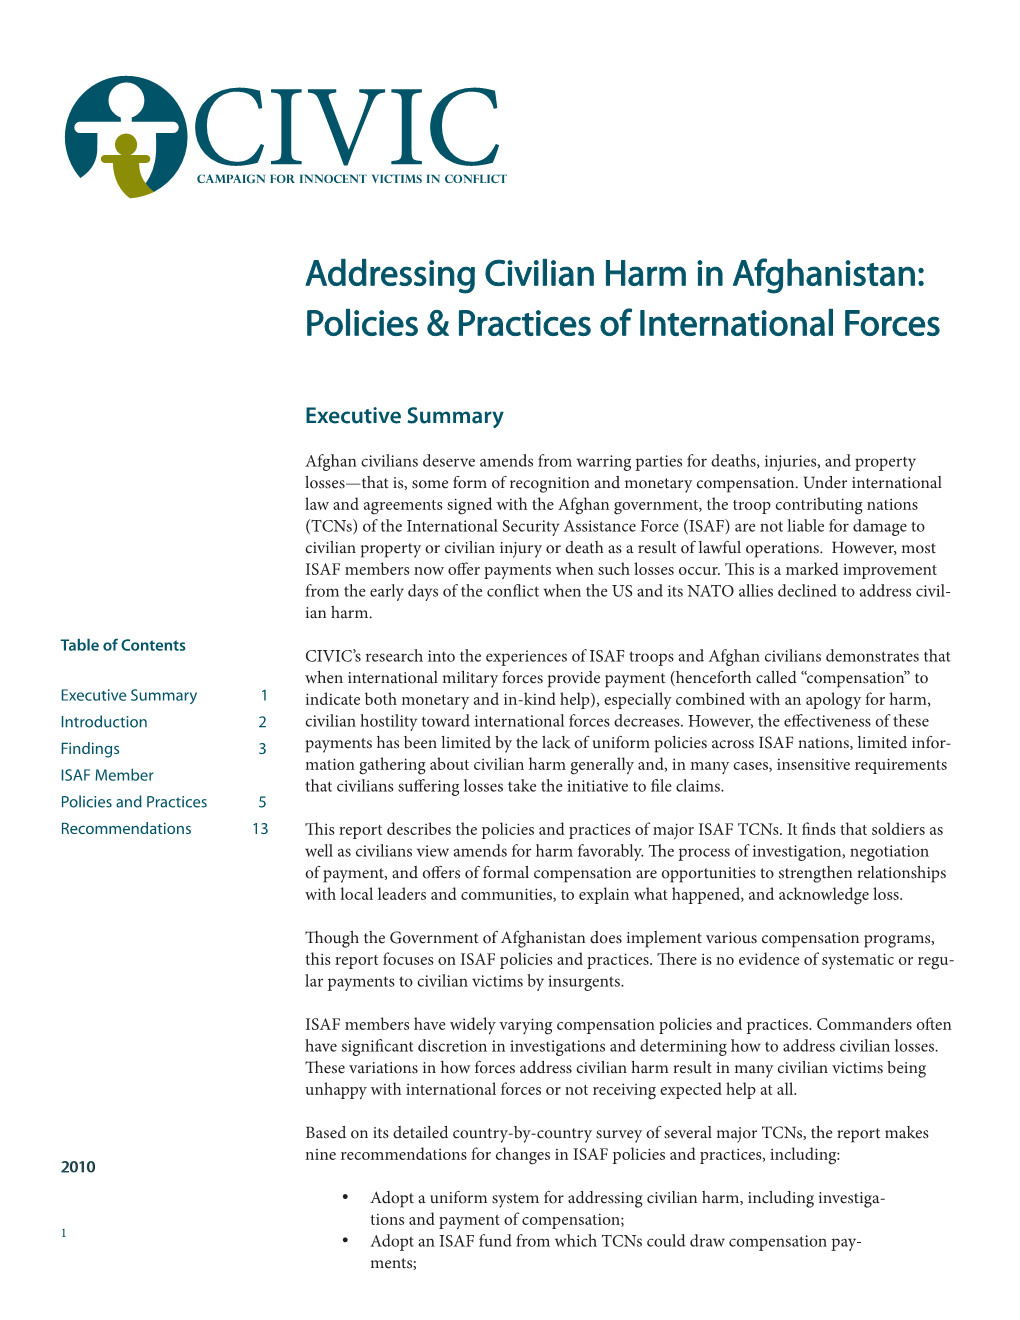 Addressing Civilian Harm in Afghanistan: Policies & Practices of International Forces